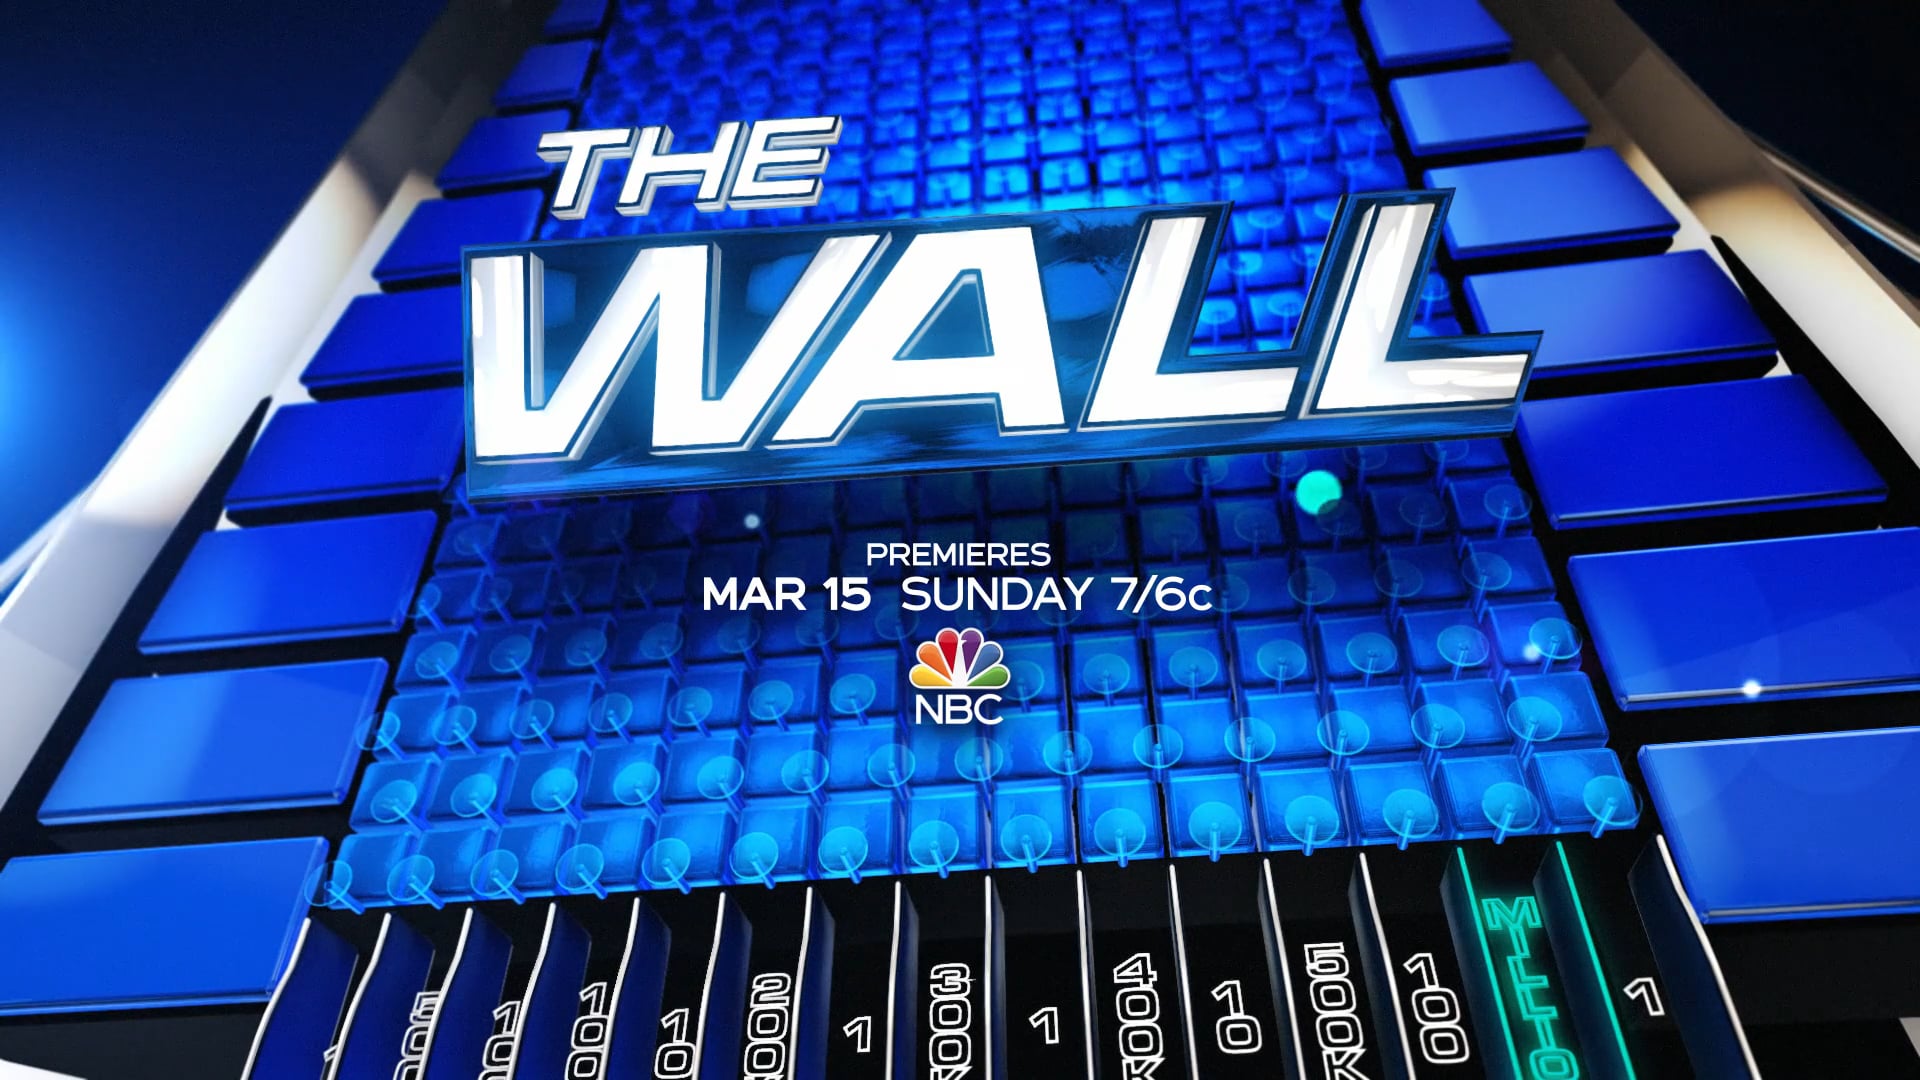 The WALL Supertease